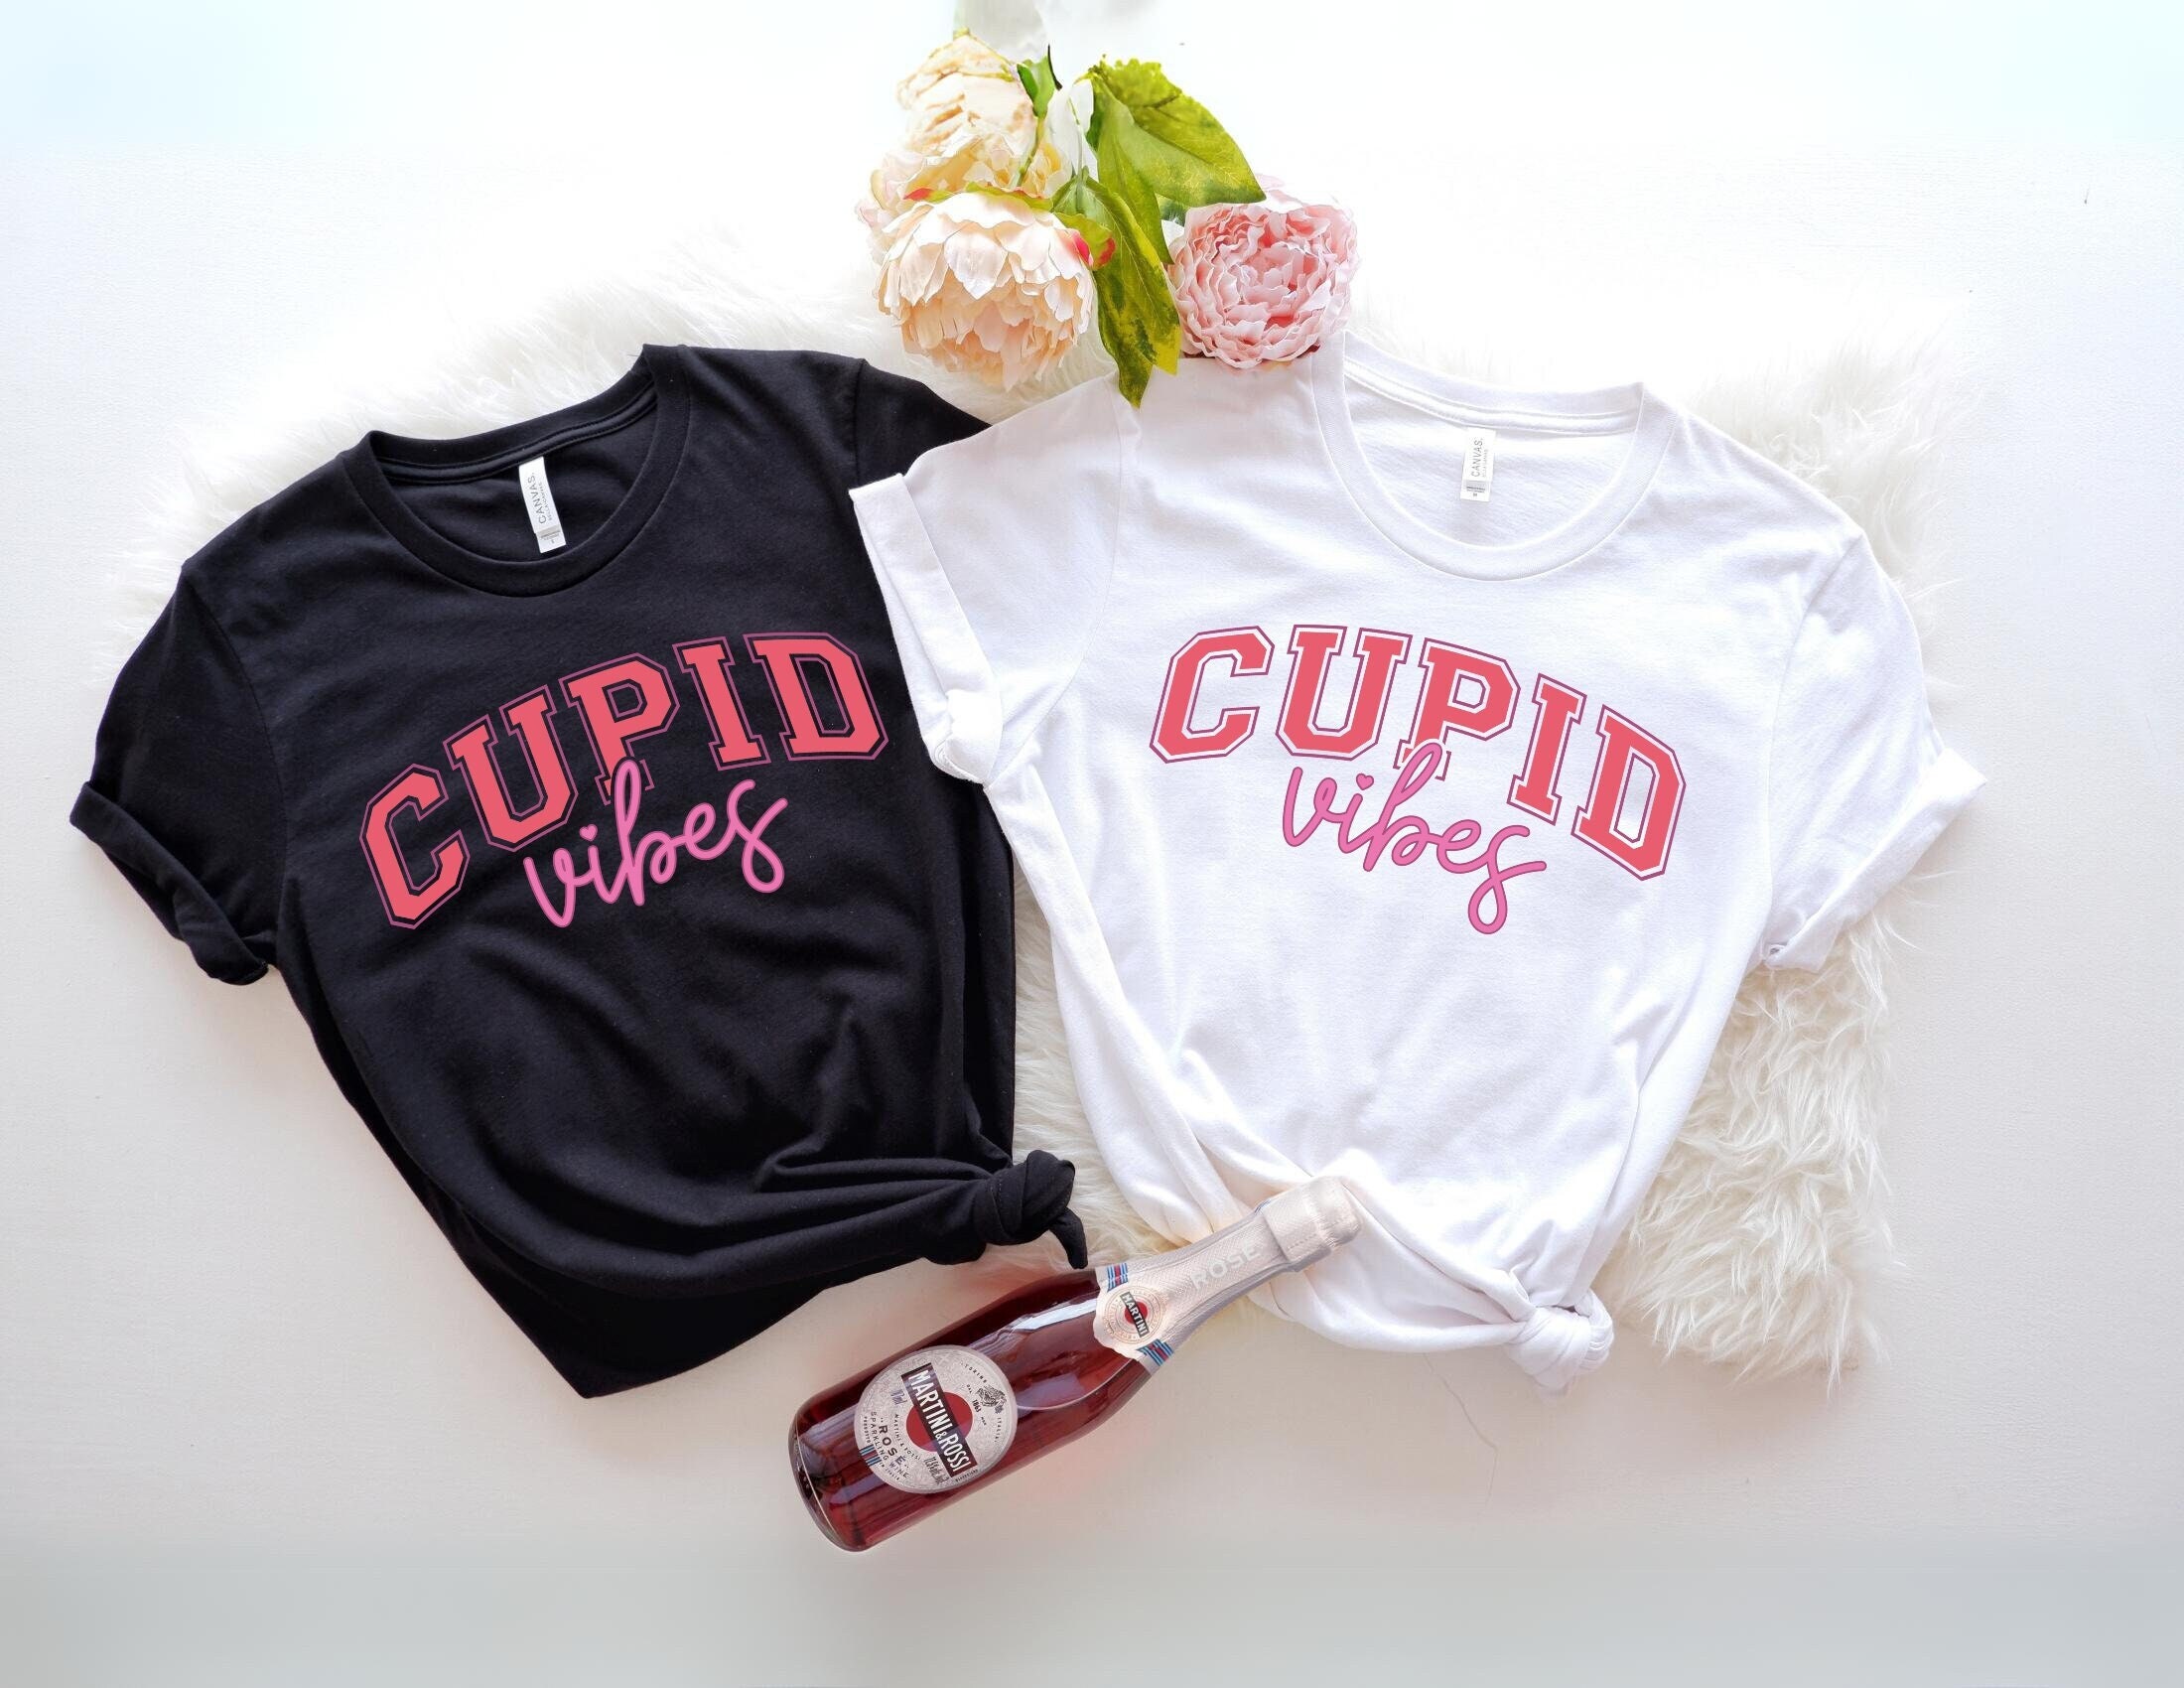 14 Valentine's Day Gift Ideas — [ The Social Blend ]